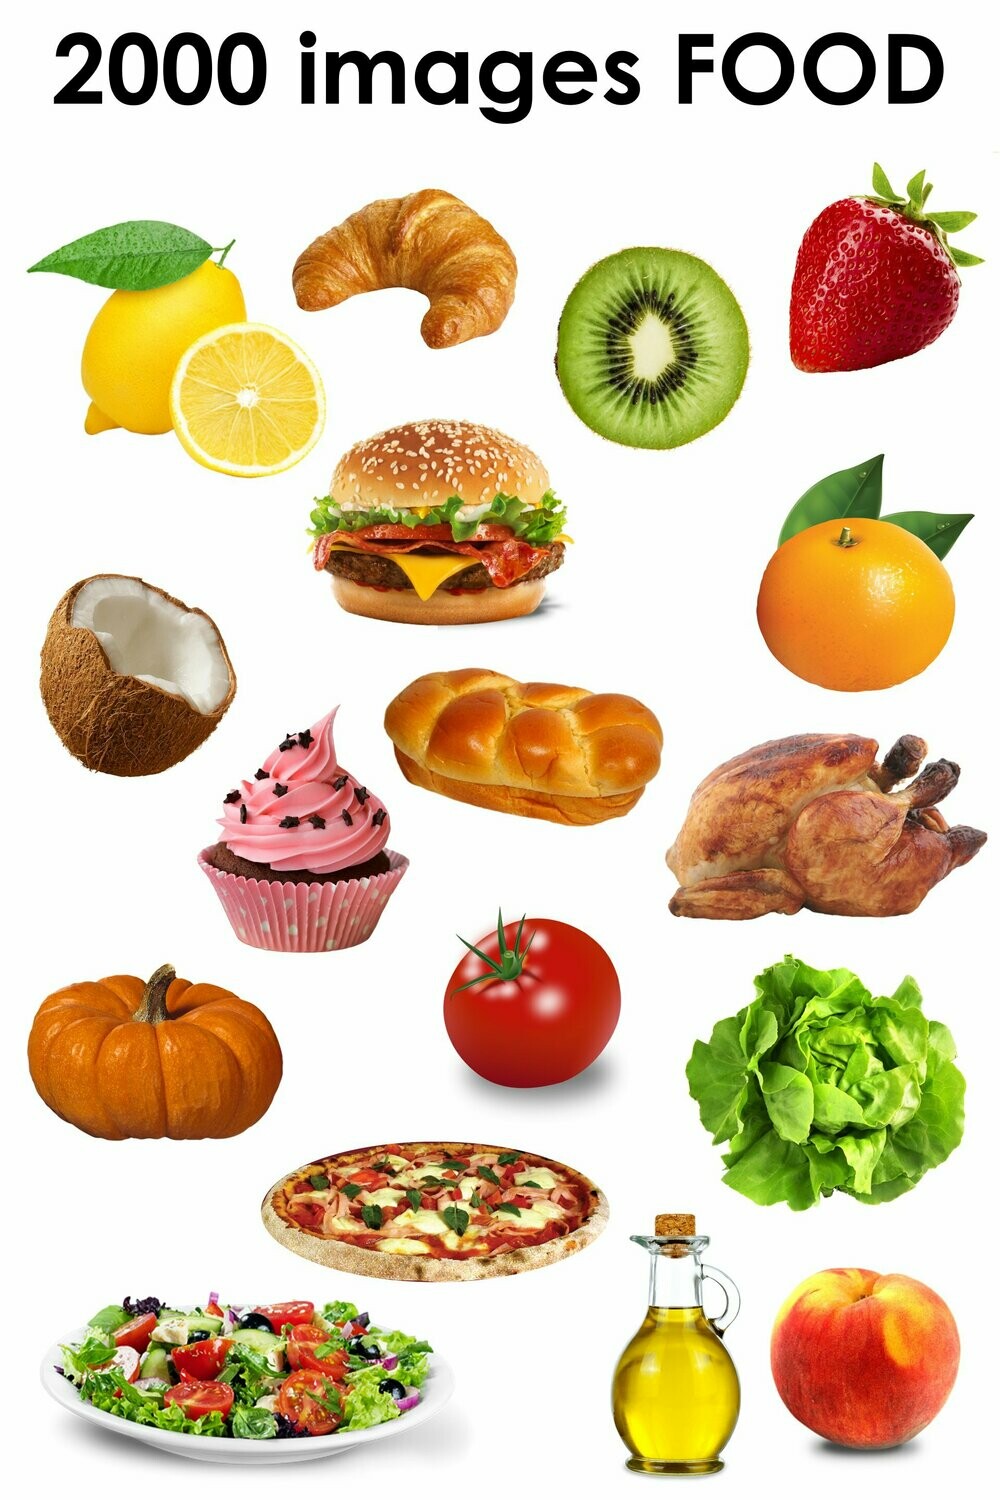 E. PACK FOOD 2000 PNG